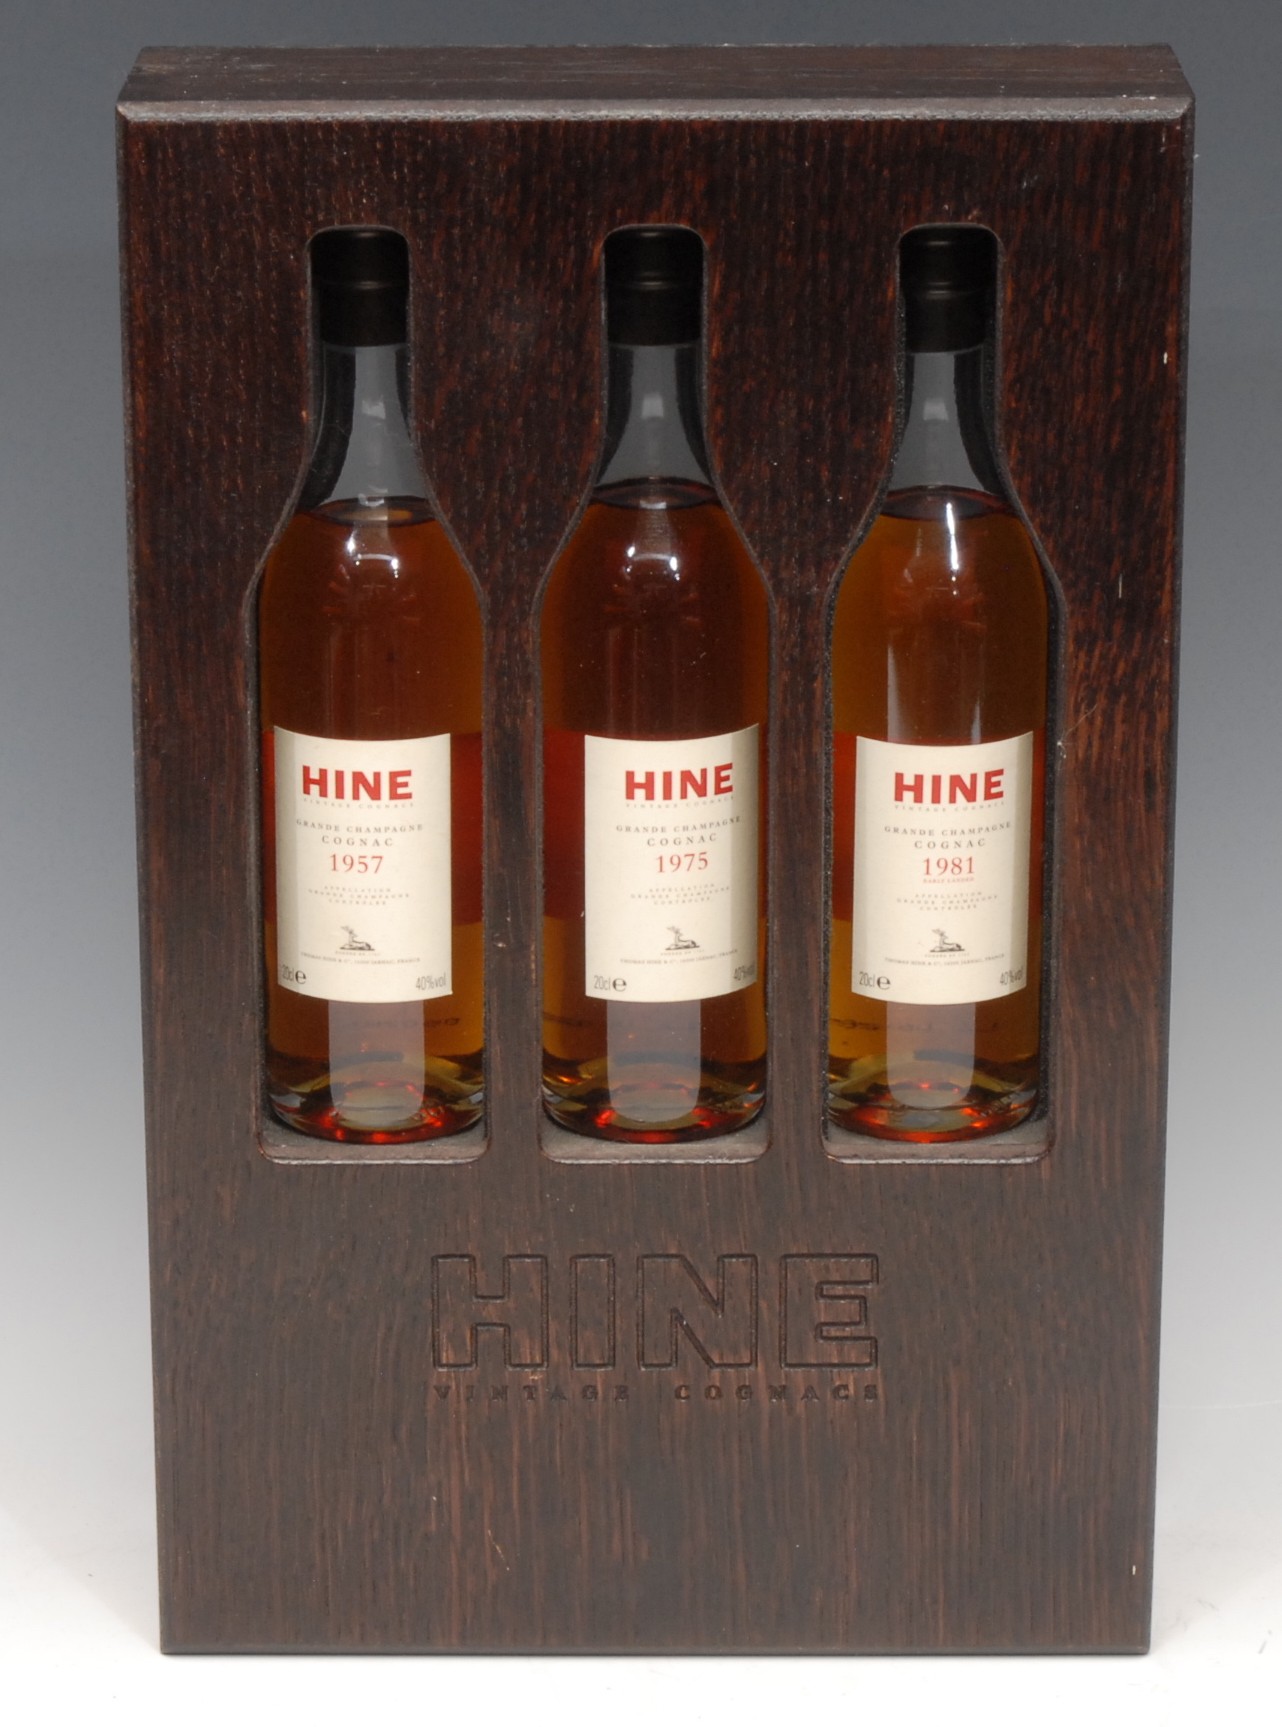 A presentation set of three 20cl bottles, Hine Grand Champagne Cognac, 1957, 1975 and 1981, wooden